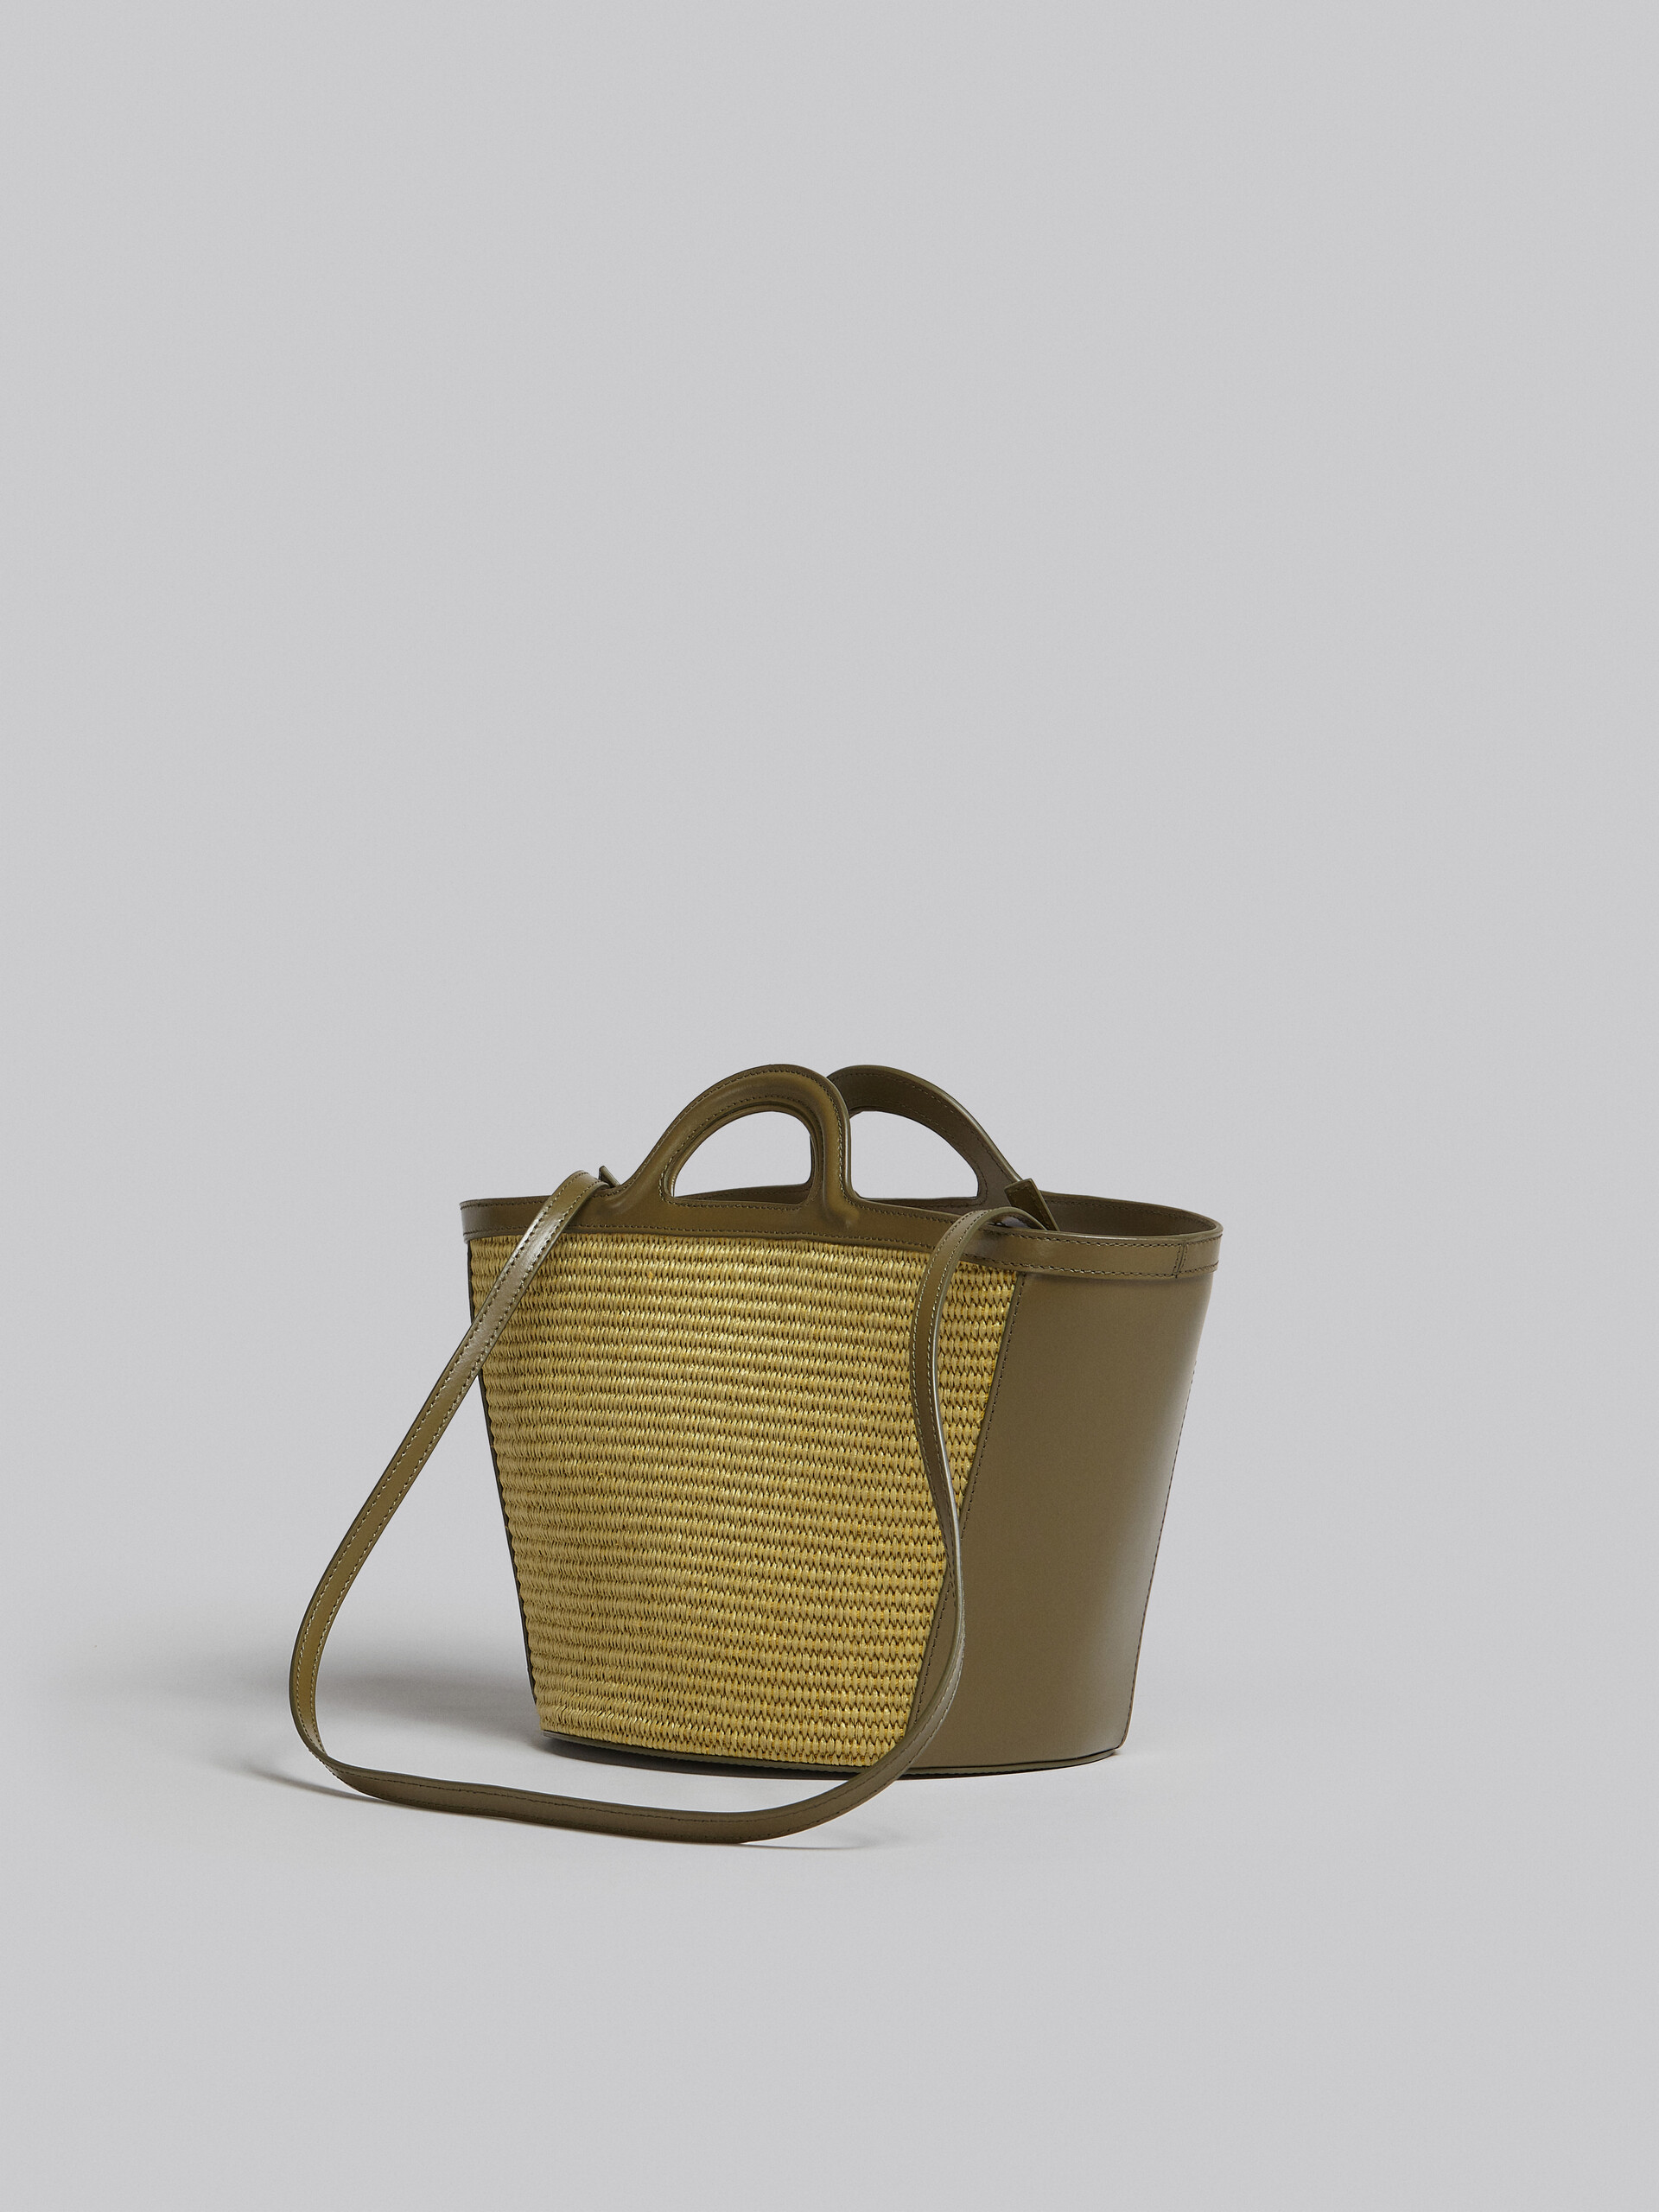 Tropicalia Small Bag in olive green leather and raffia - Handbags - Image 3